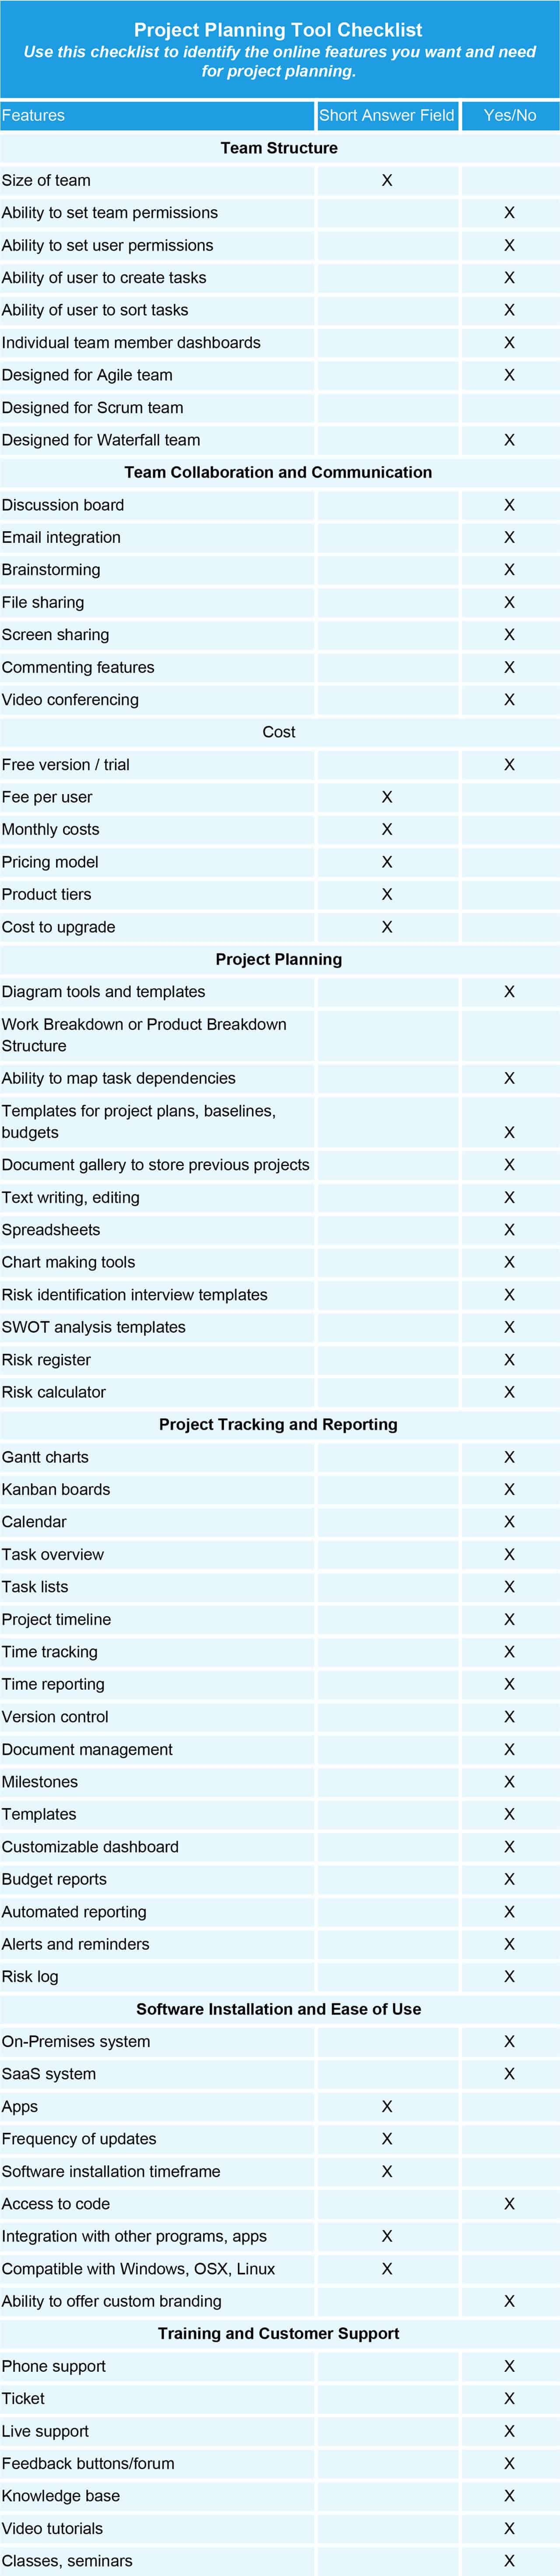 Project Planning Tool Checklist